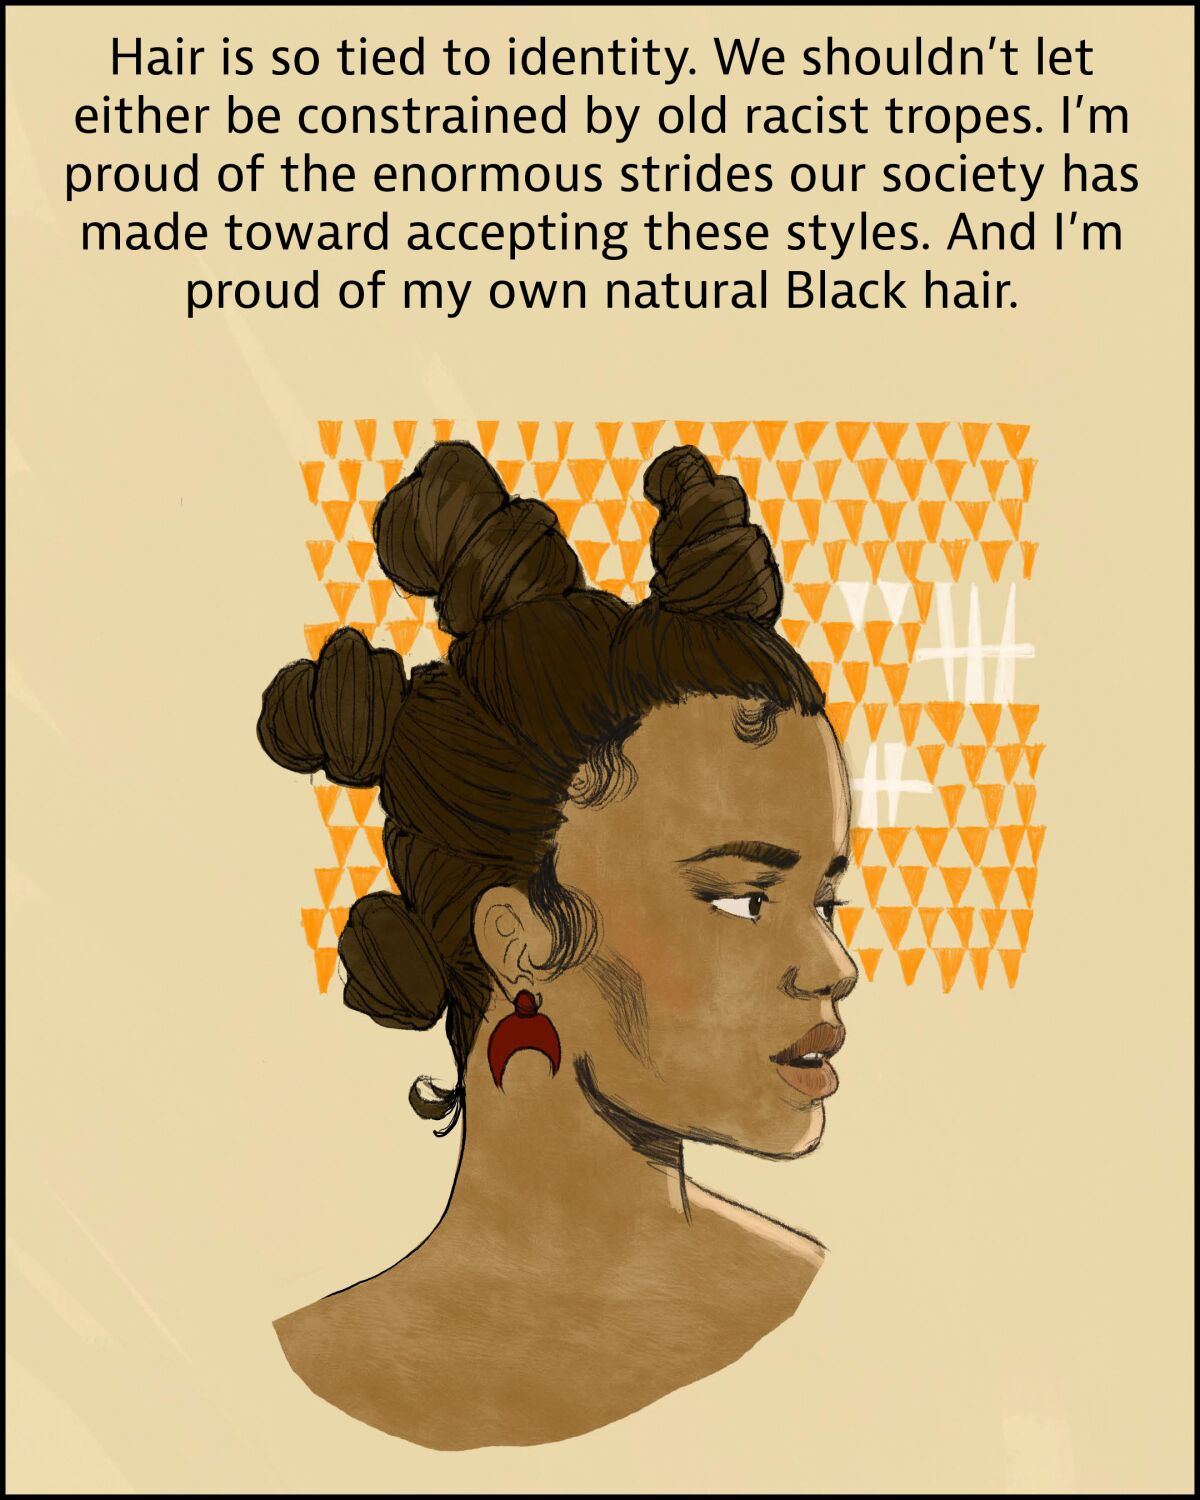 Hair is so tied to identity. We shouldn't let it be constrained by old racist tropes. I'm proud of my own natural Black hair.